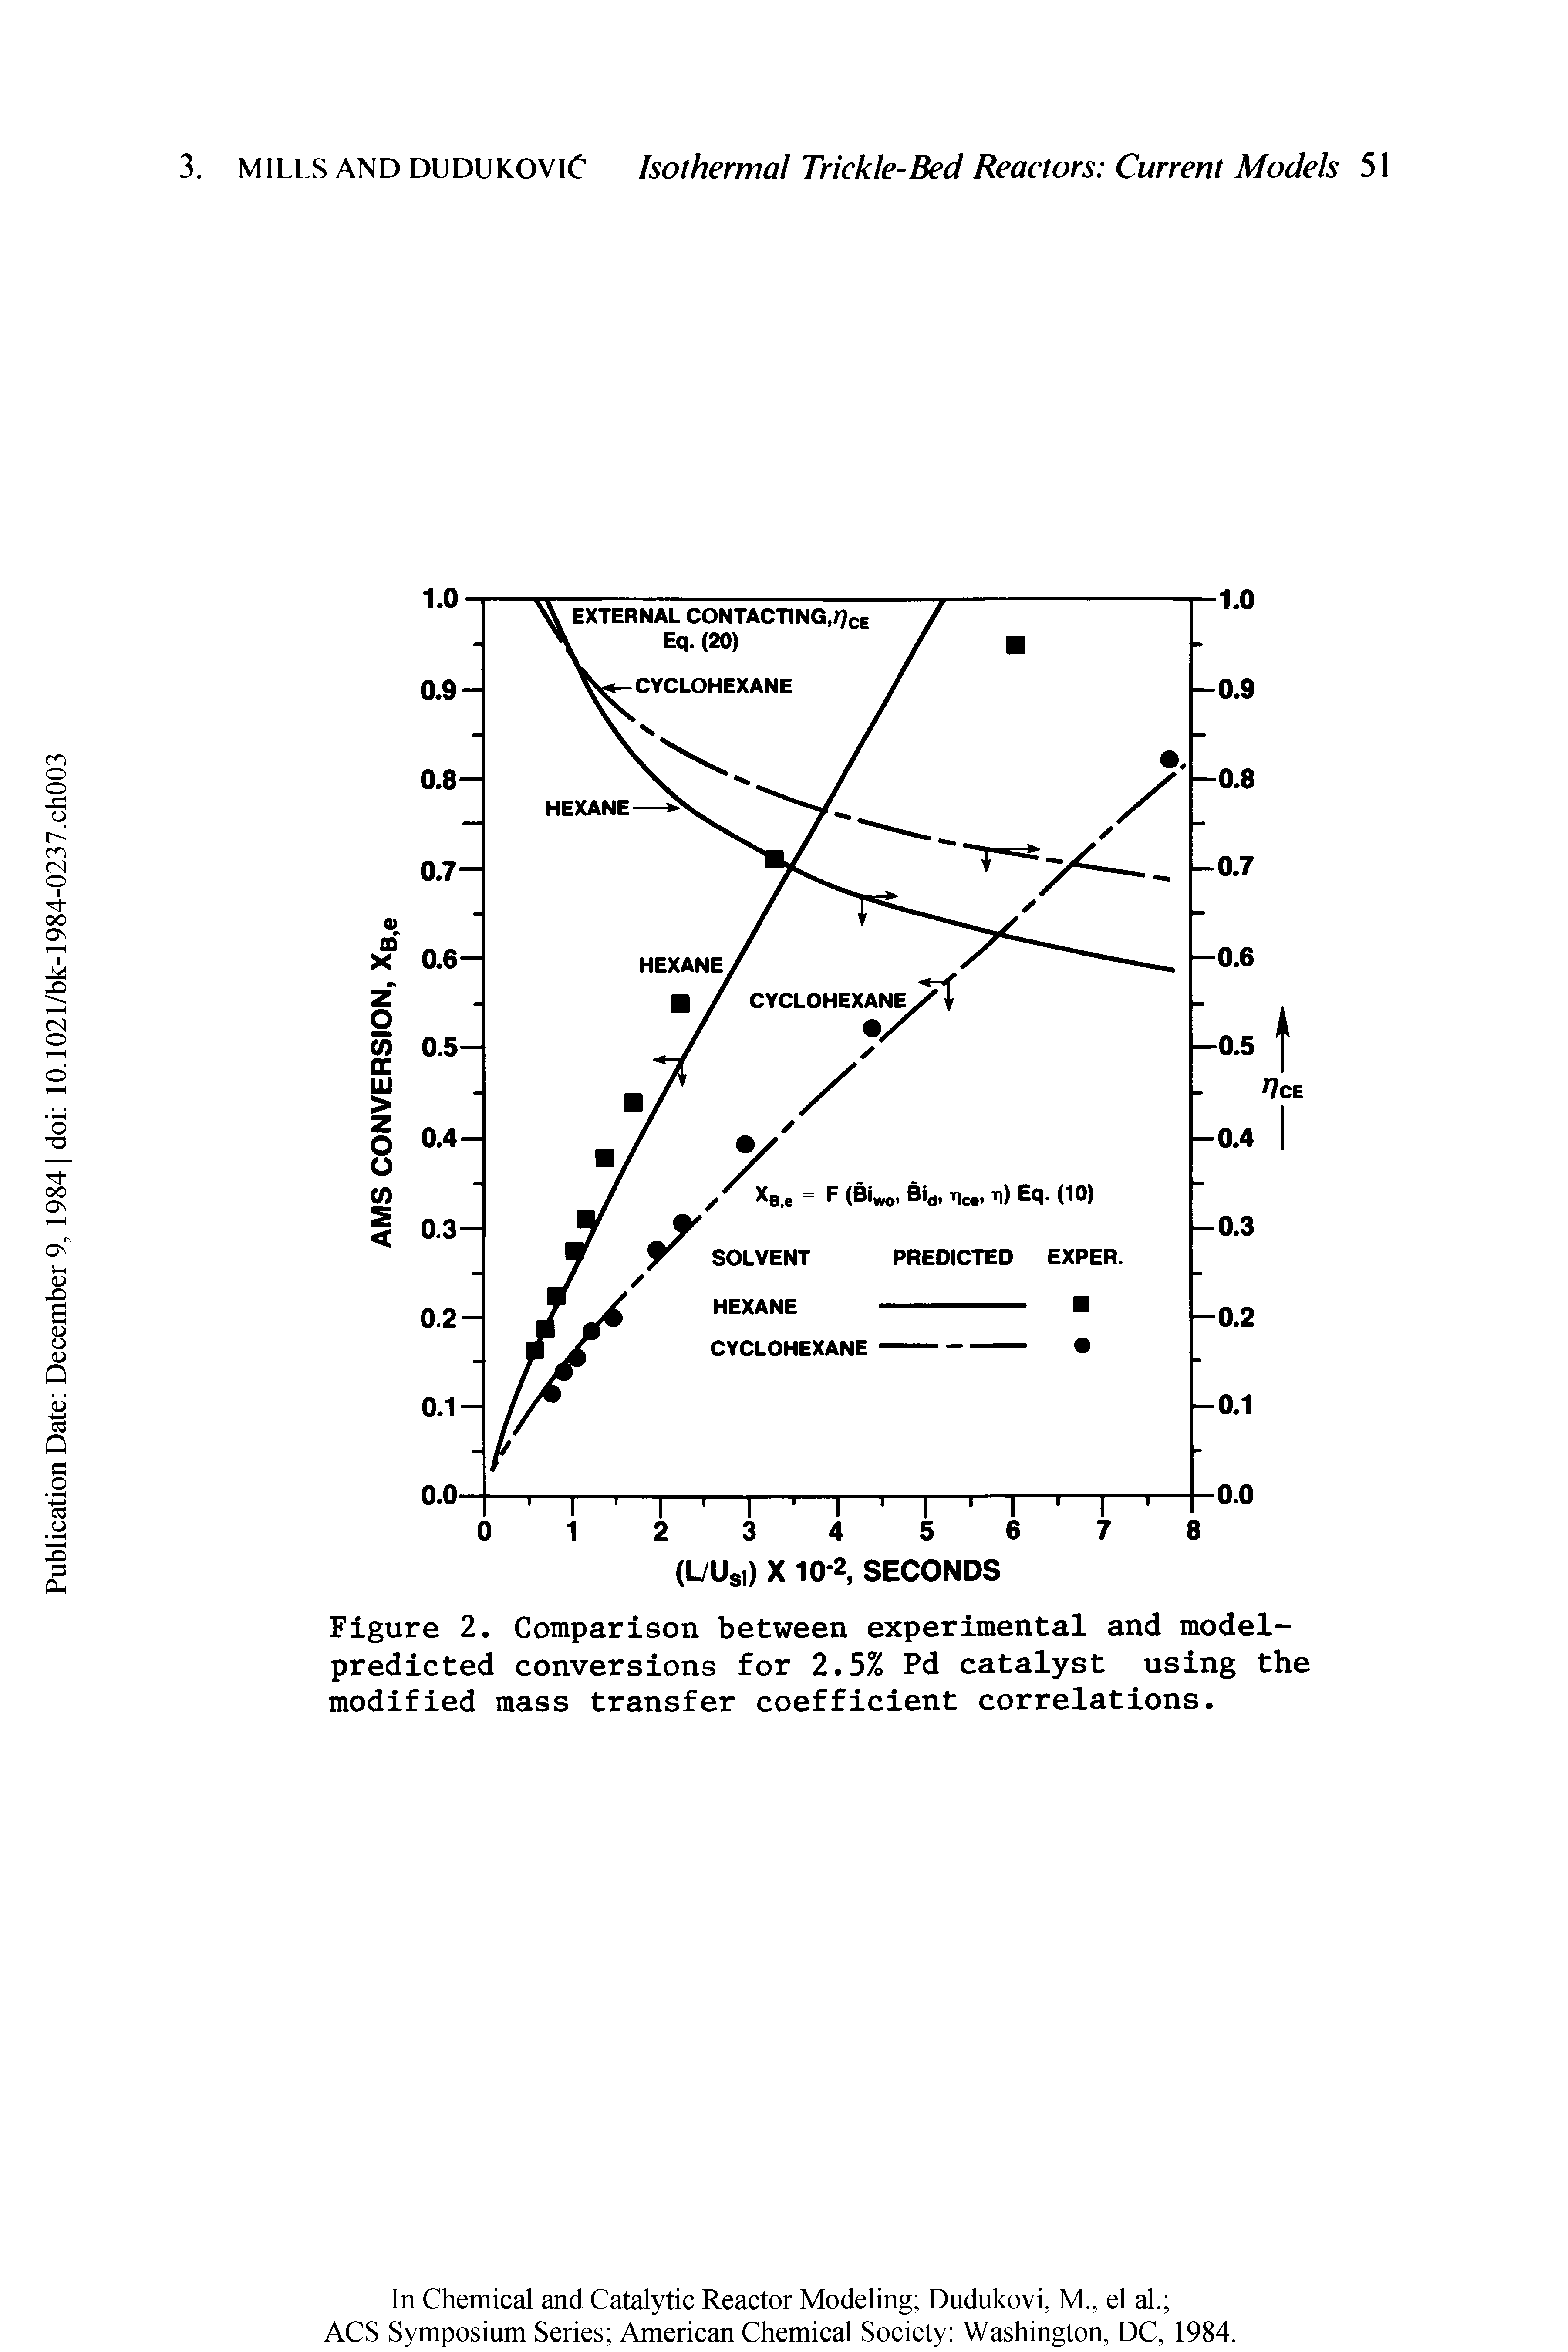 Figure 2. Comparison between experimental and model-predicted conversions for 2.5% Pd catalyst using the modified mass transfer coefficient correlations.